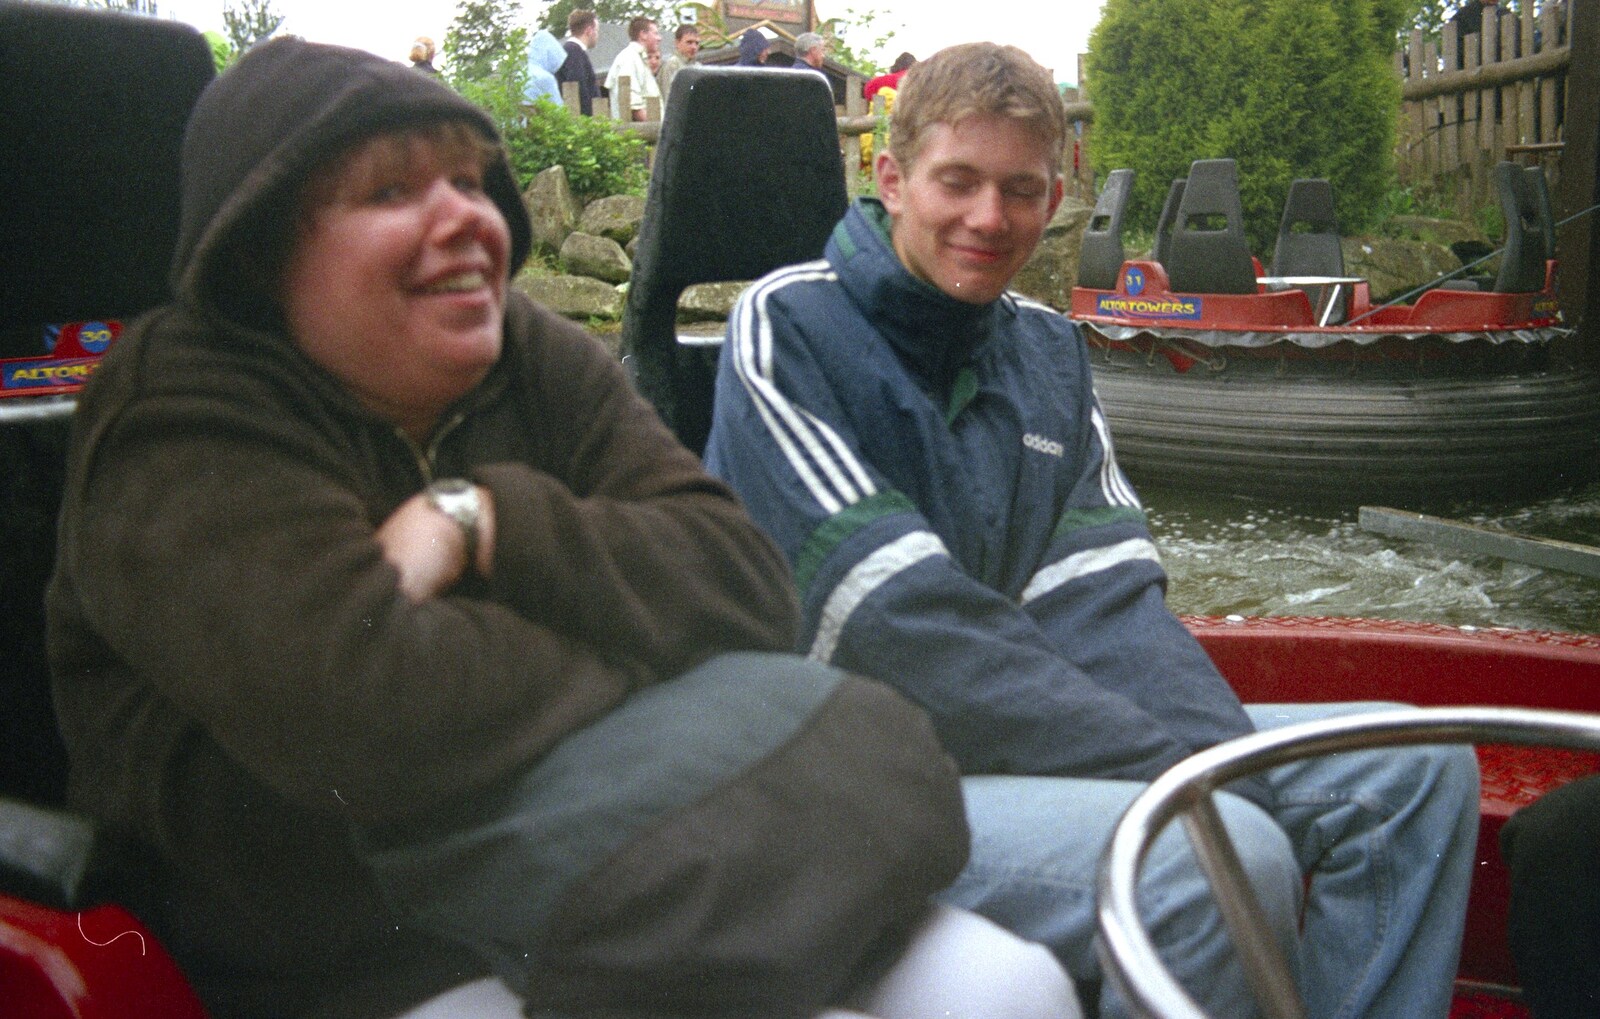 A Trip to Alton Towers, Staffordshire - 15th June 2000: Sis and The Boy Phil